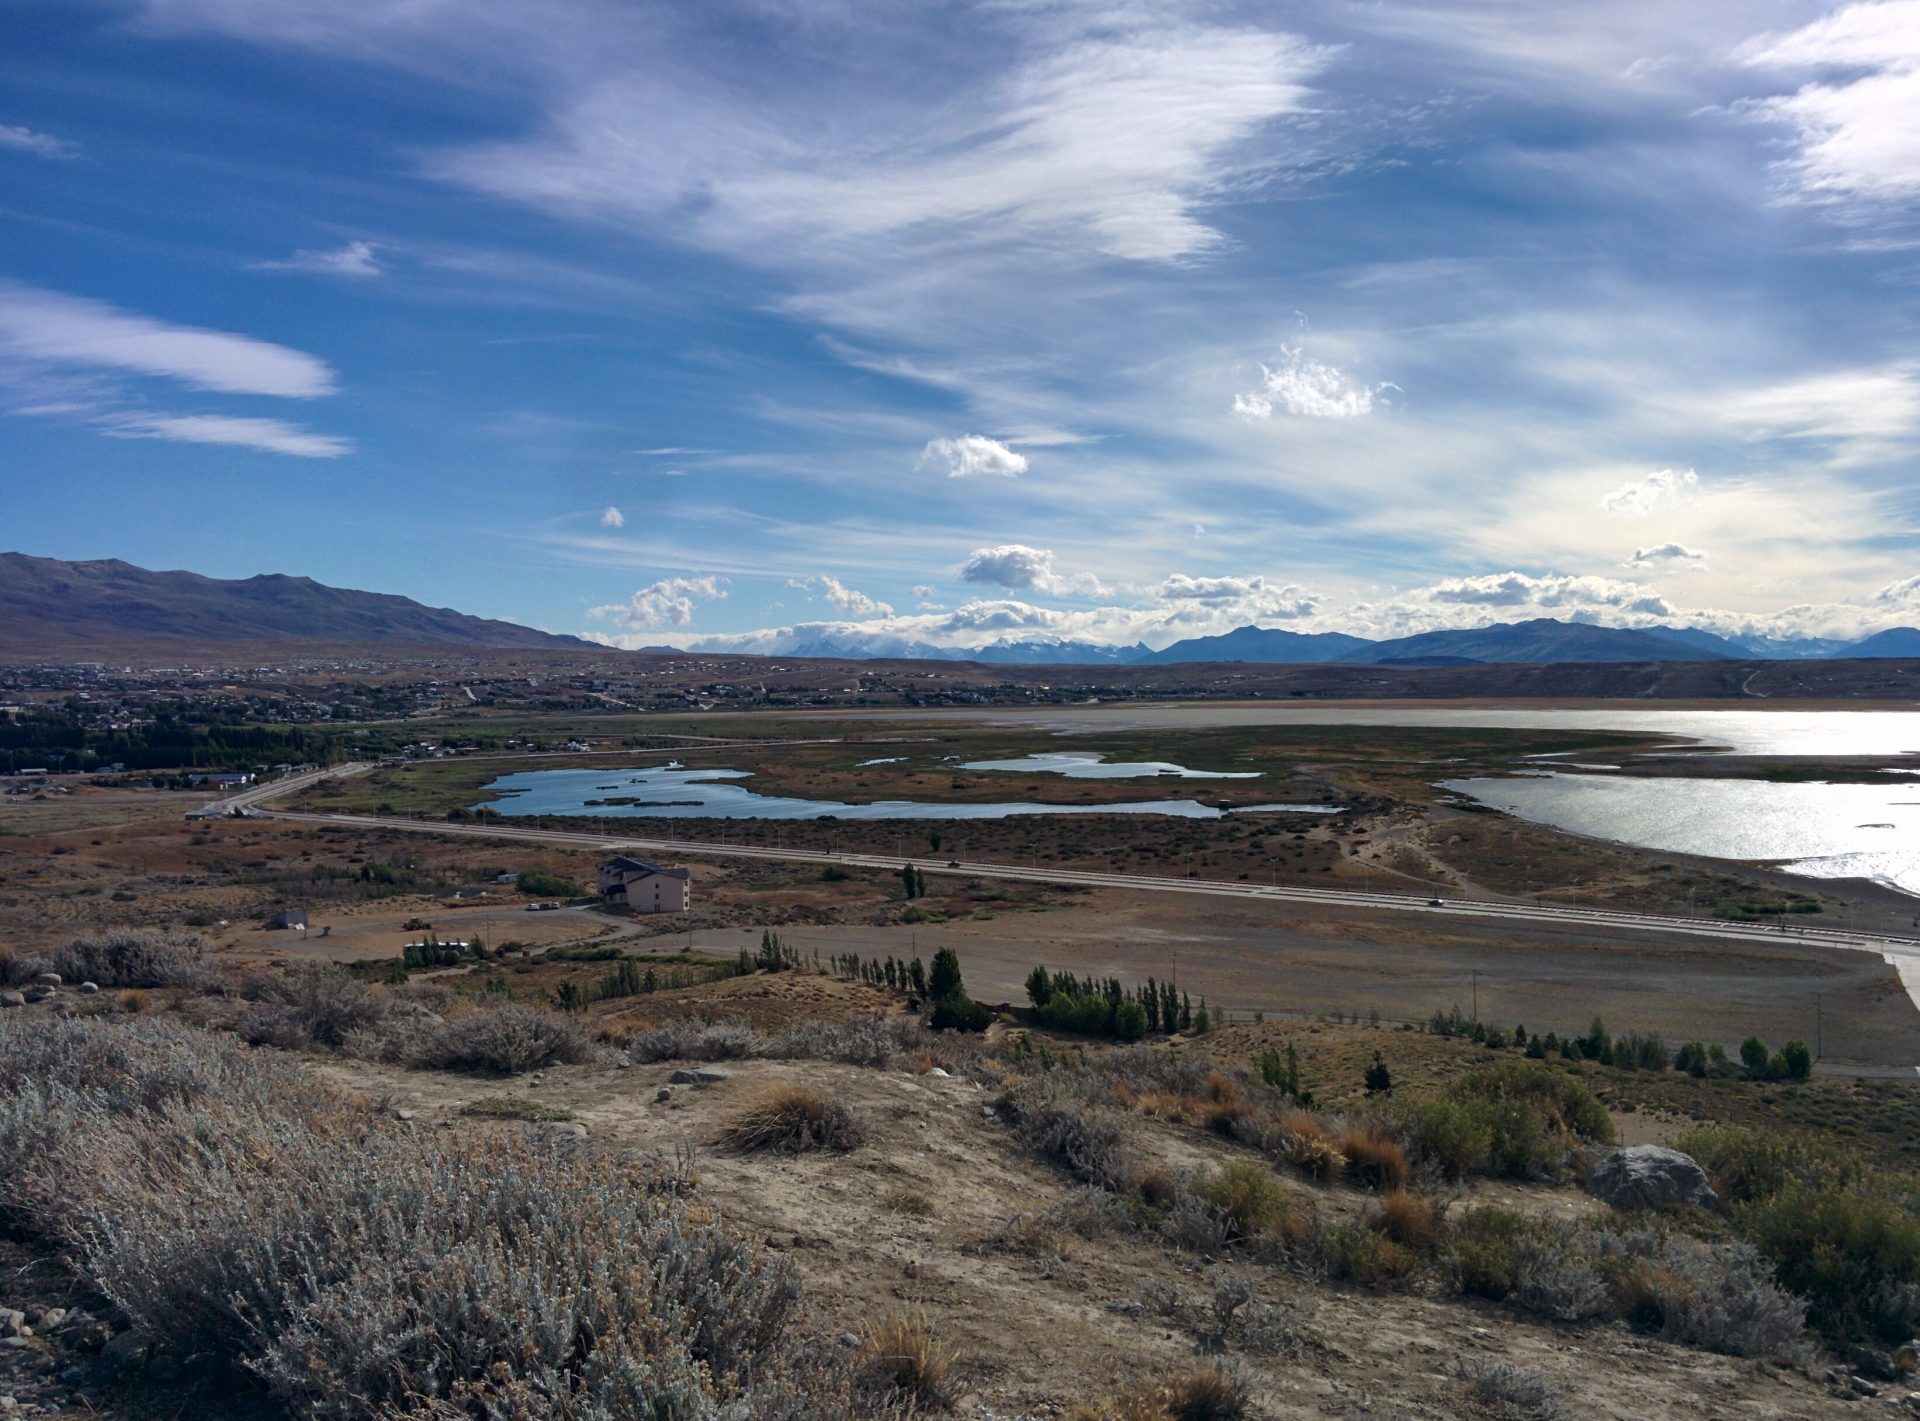 The city of El Calafate in the Background and the reserve of Laguna Nimez in the forground